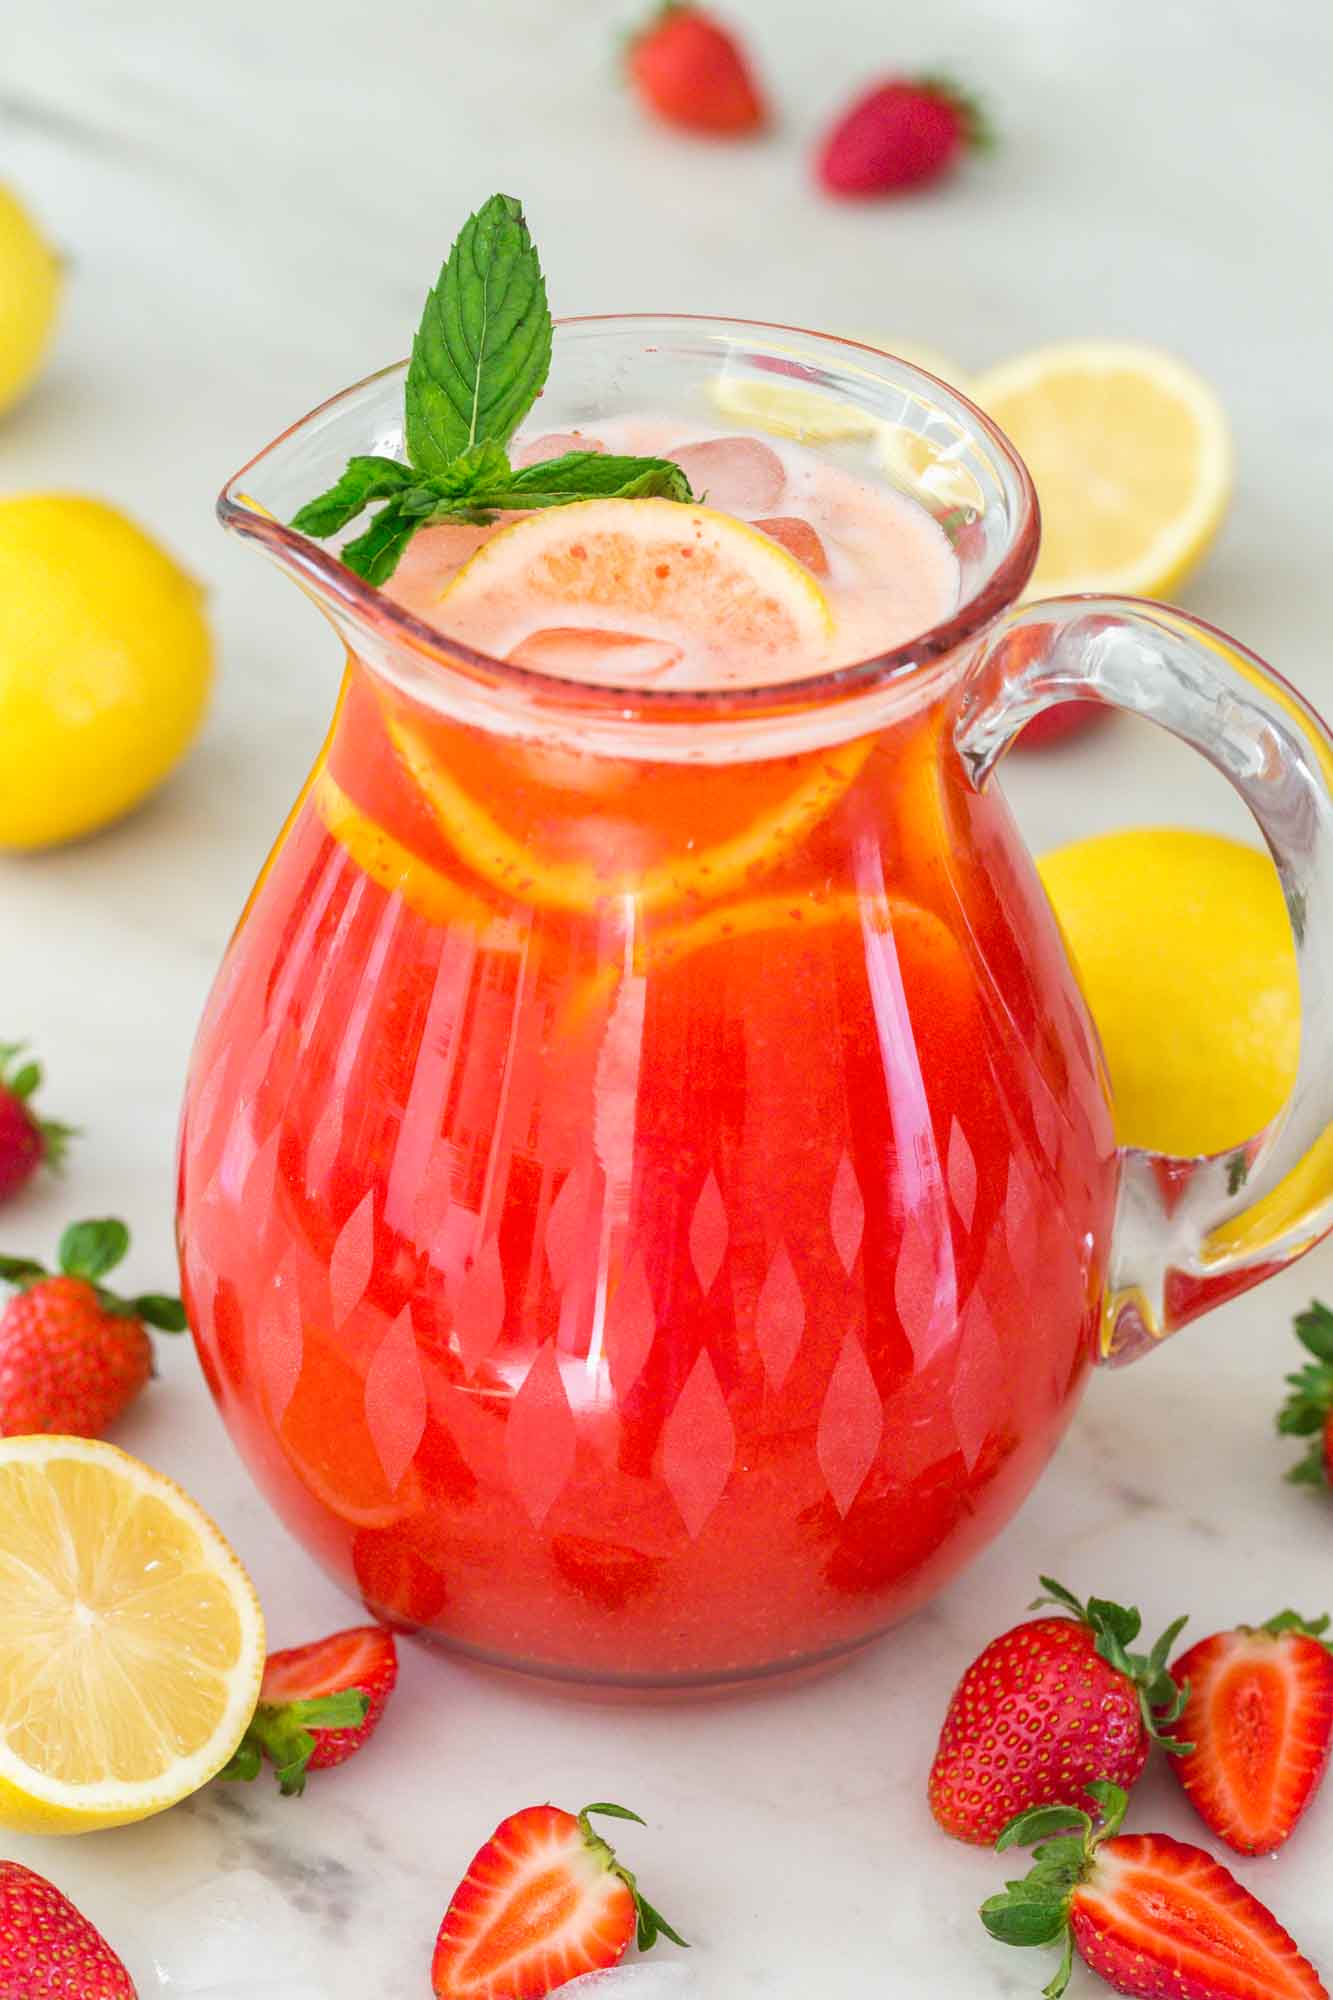 Strawberry lemonade in a glass pitcher with fresh strawberries and fresh lemons